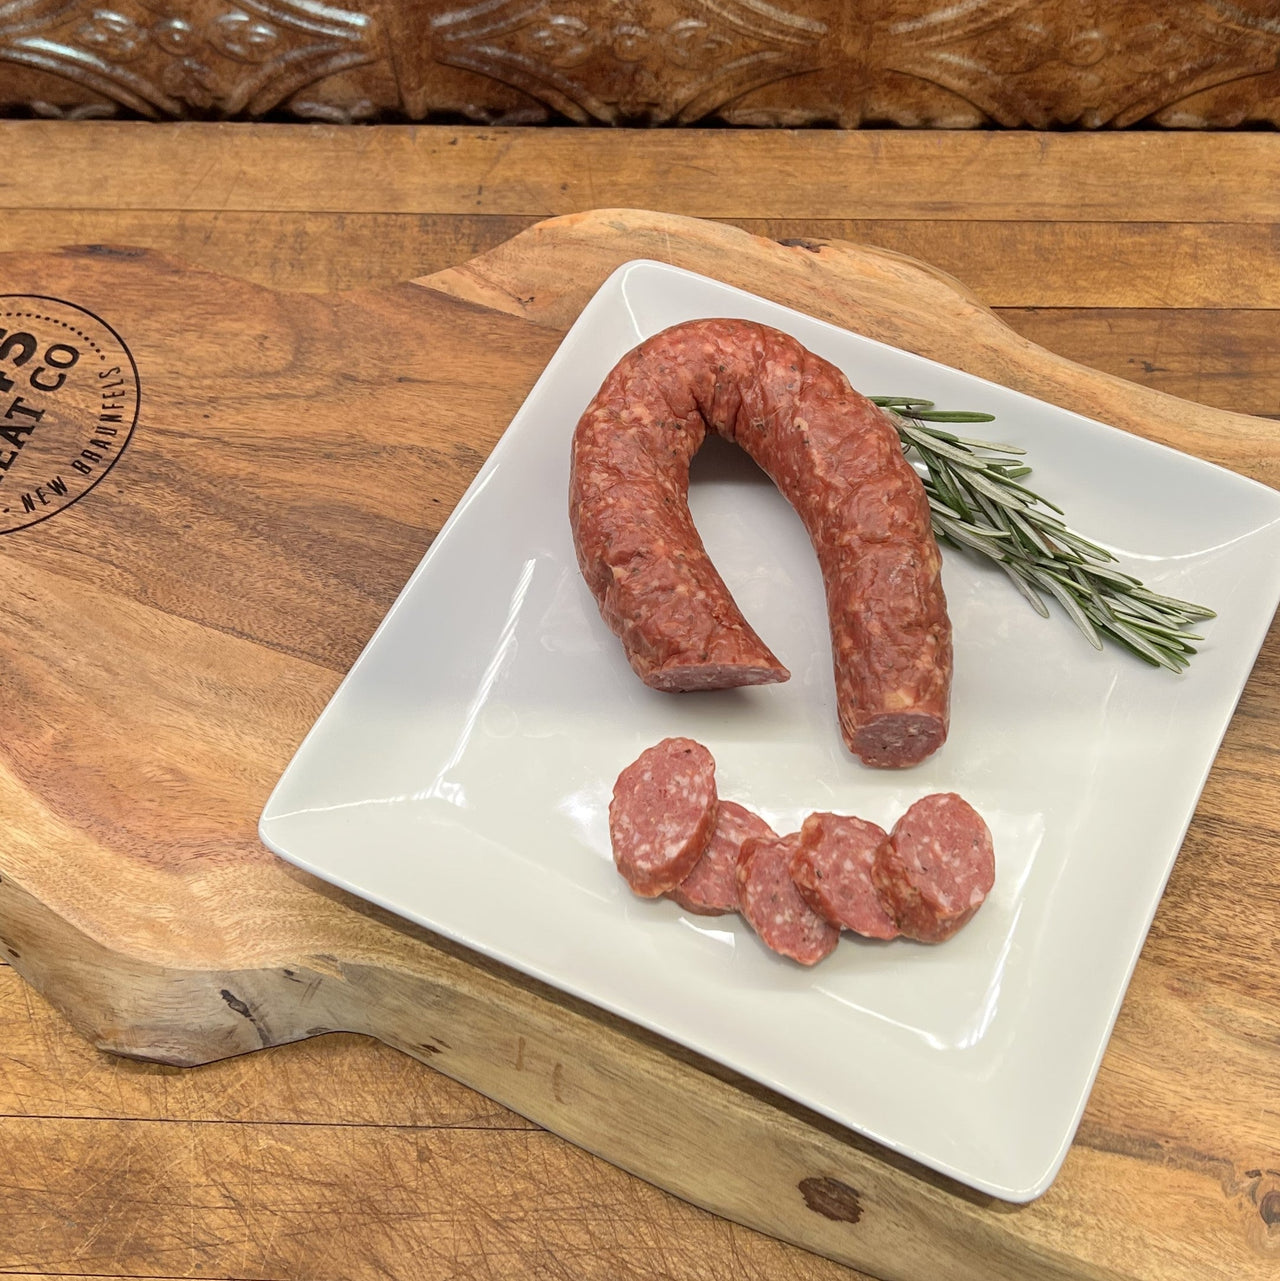 ﻿This wonderful Venison & Pork Sausage is based on an old Tays Family recipe loved by family and friends for years.